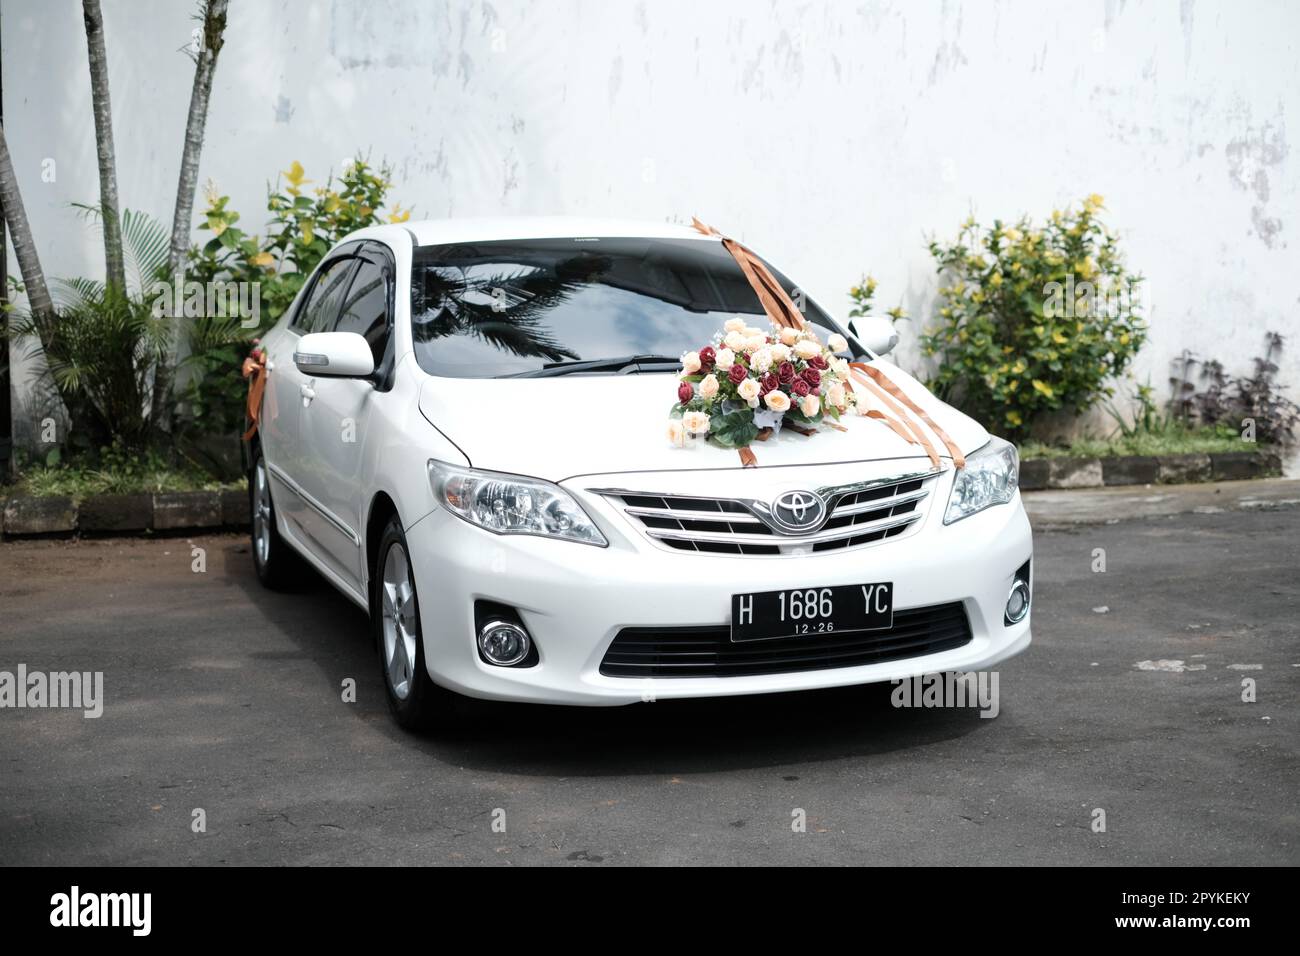 The Wedding car, I took this photo during a wedding photo job, before the bride and groom got into the car, after that I took a good photo perferct. Stock Photo